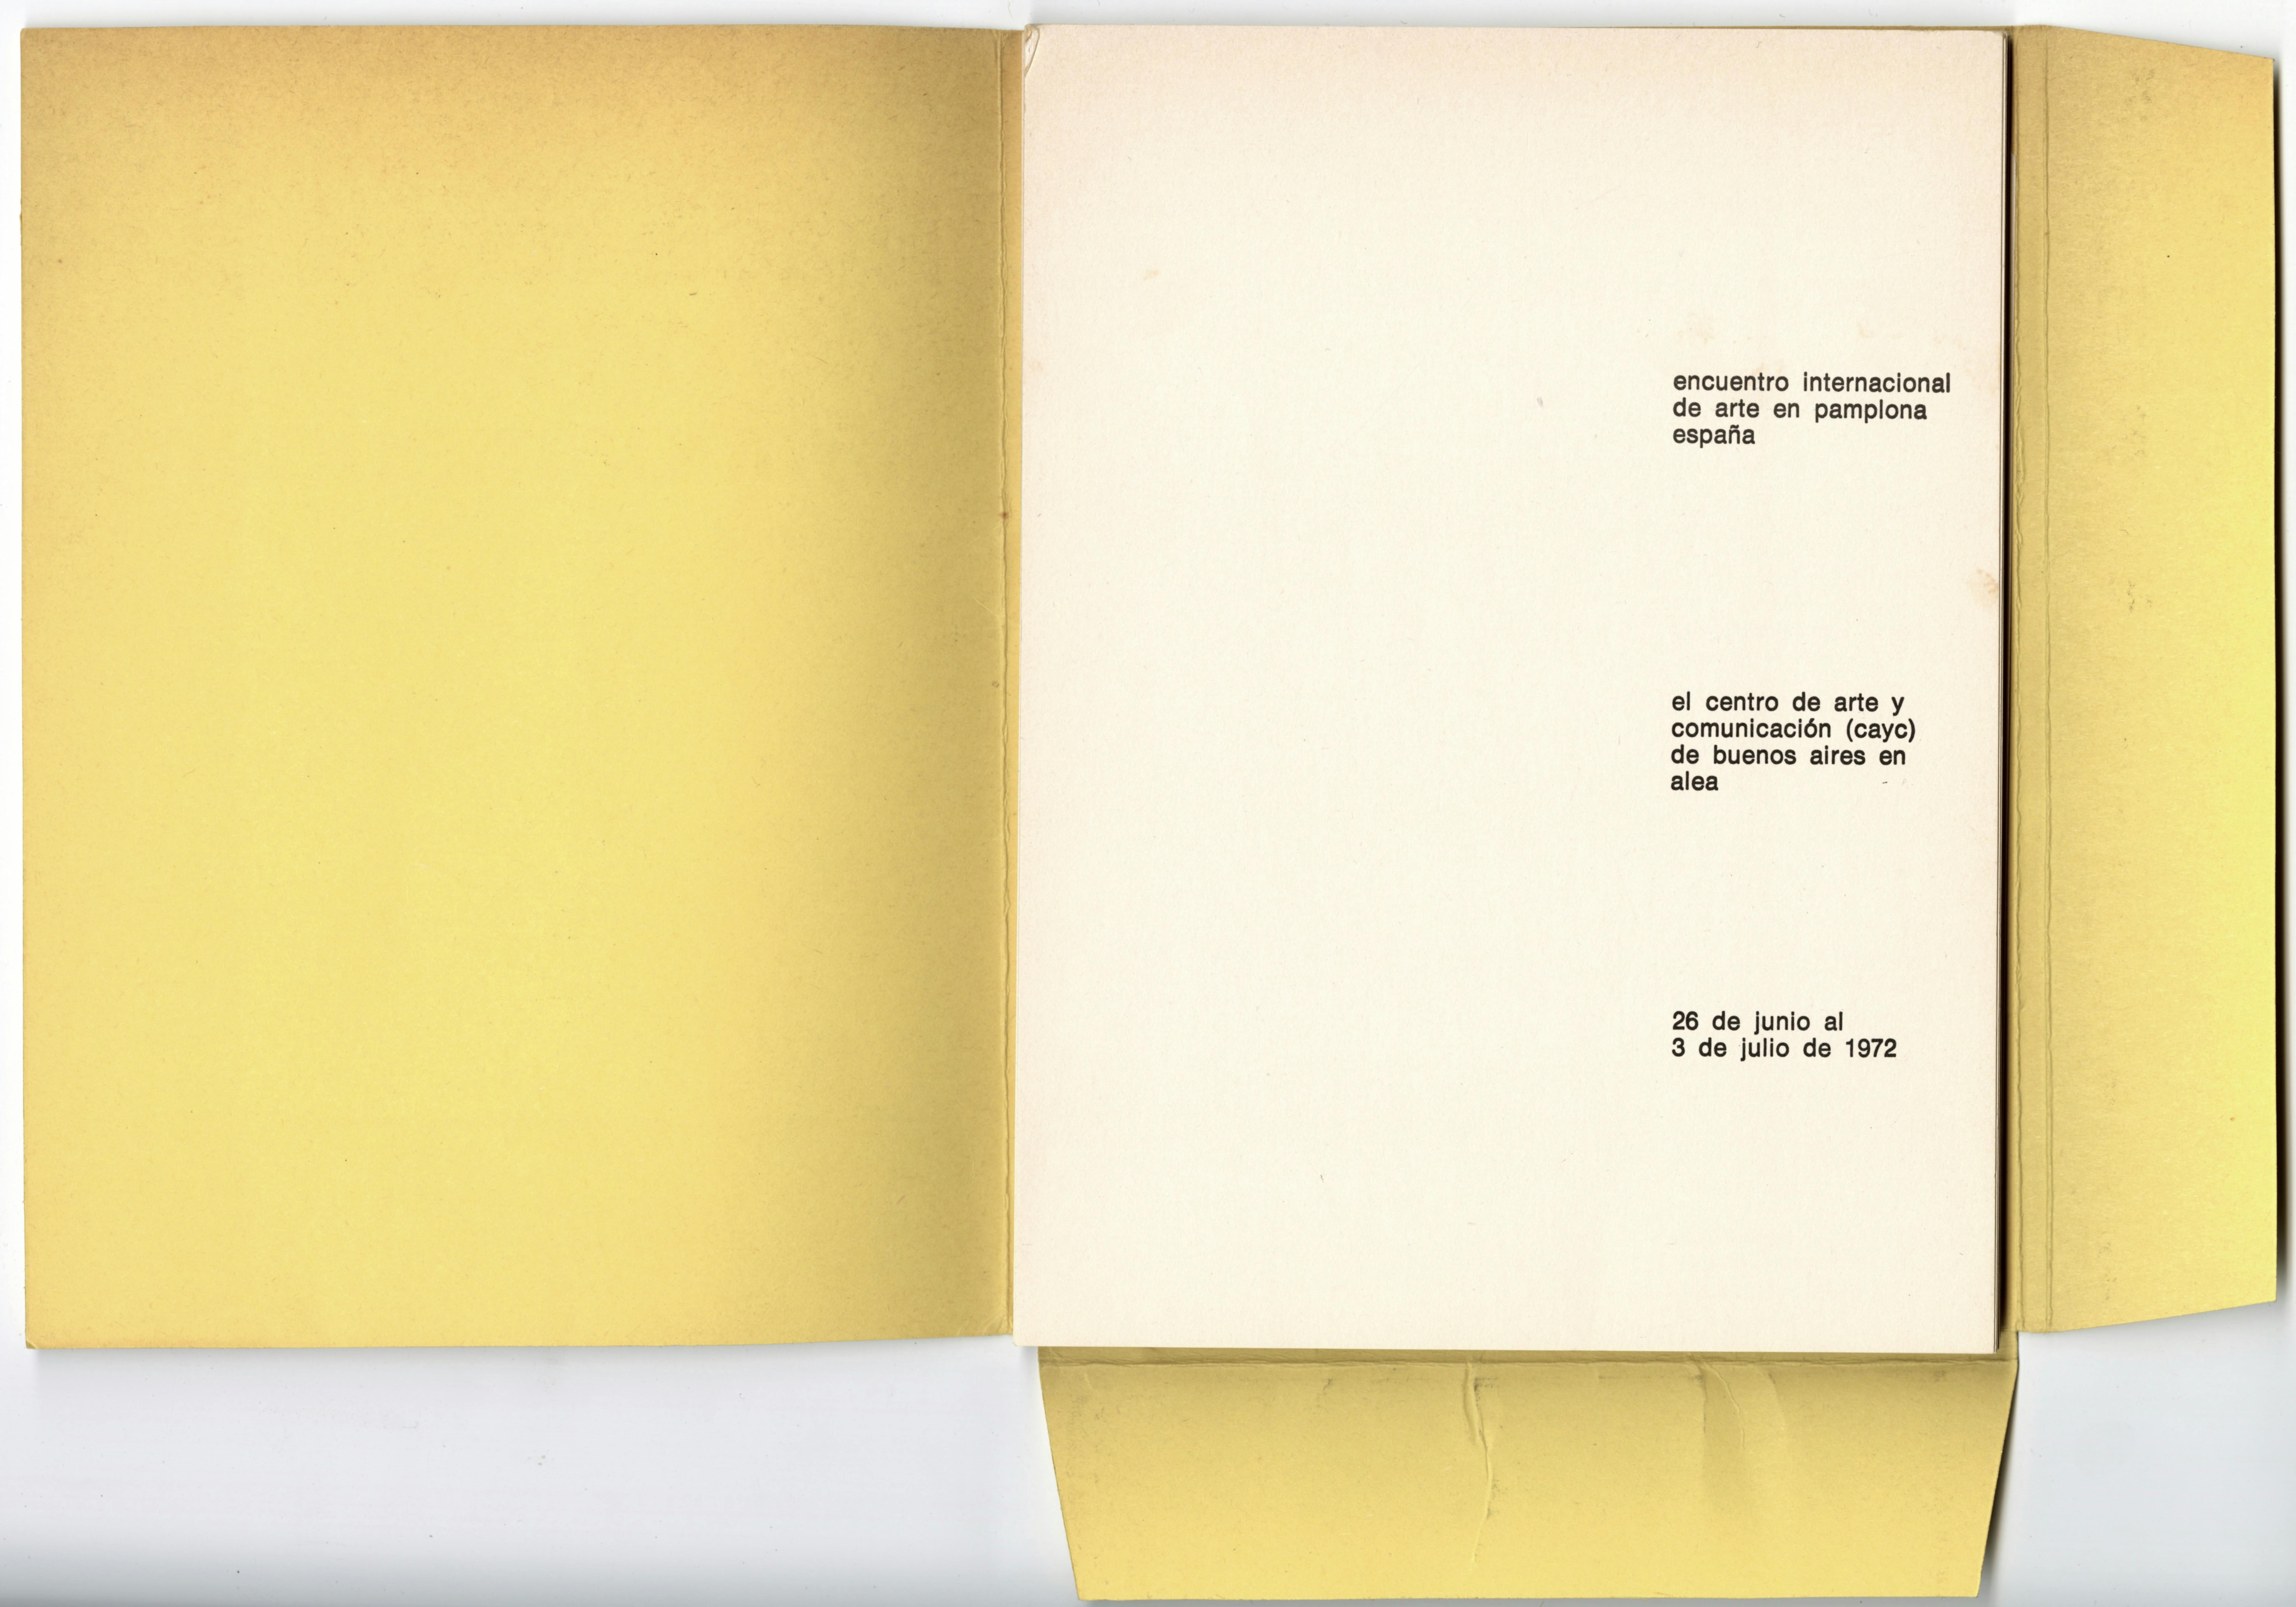 A book with a yellow jacket with flaps on the right and lower edges of the book, opened to the first page. The title of the catalogue, the publisher, and the exhibition dates are printed in black type.